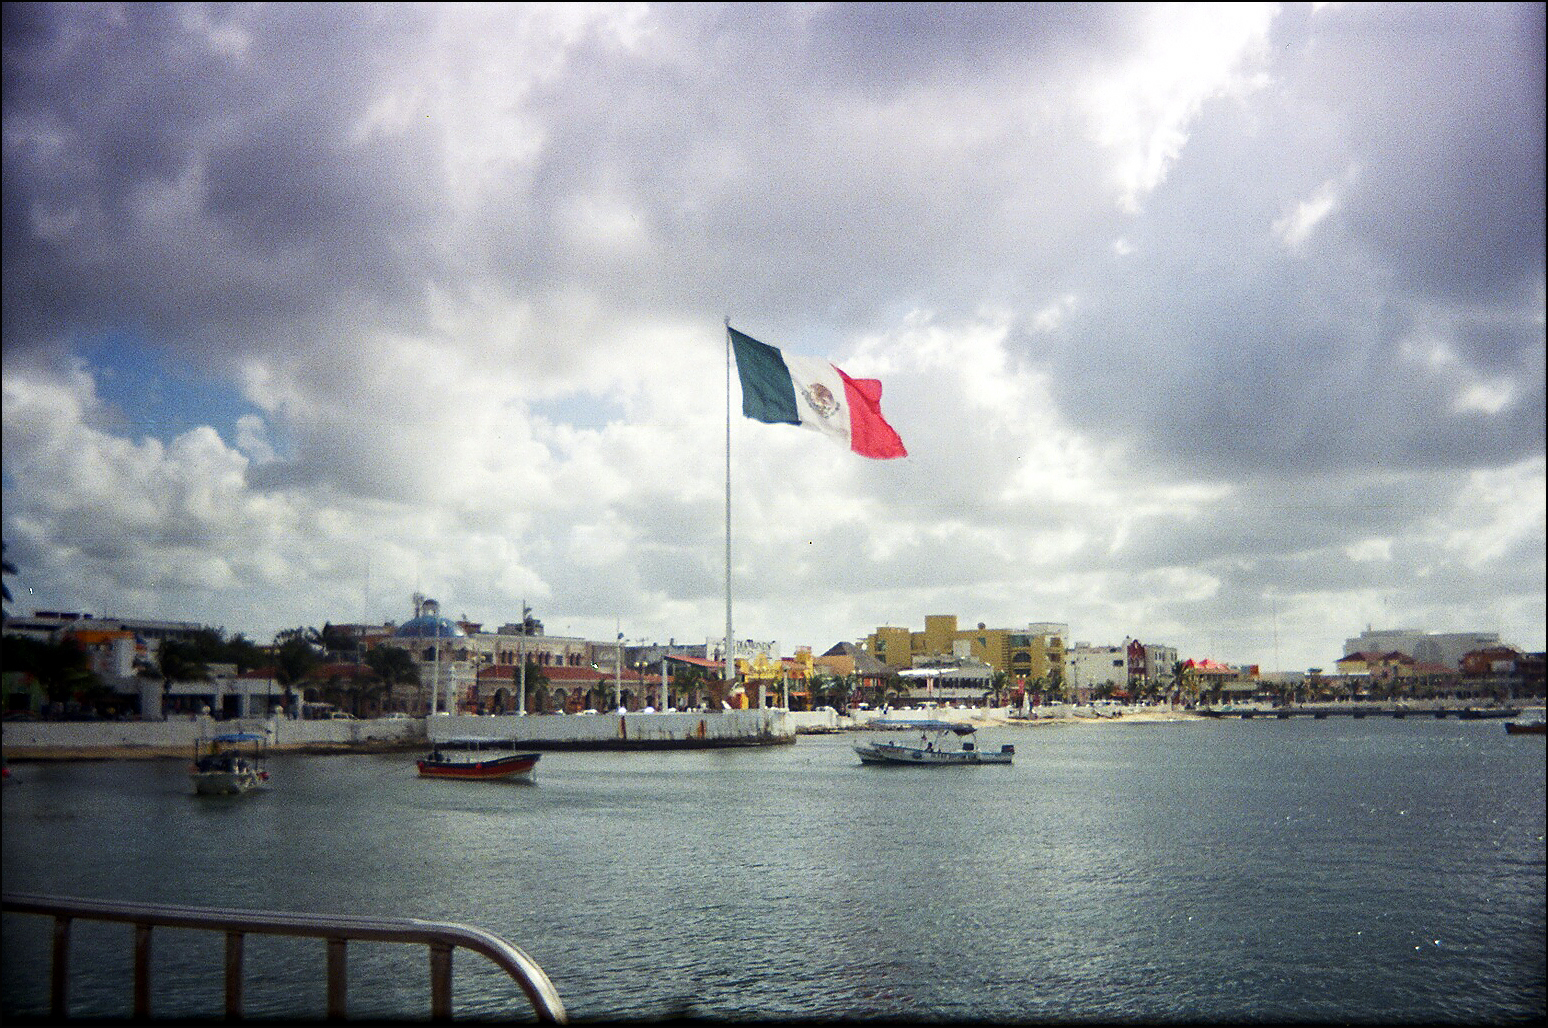 A photo of the Mexican flag near the US border